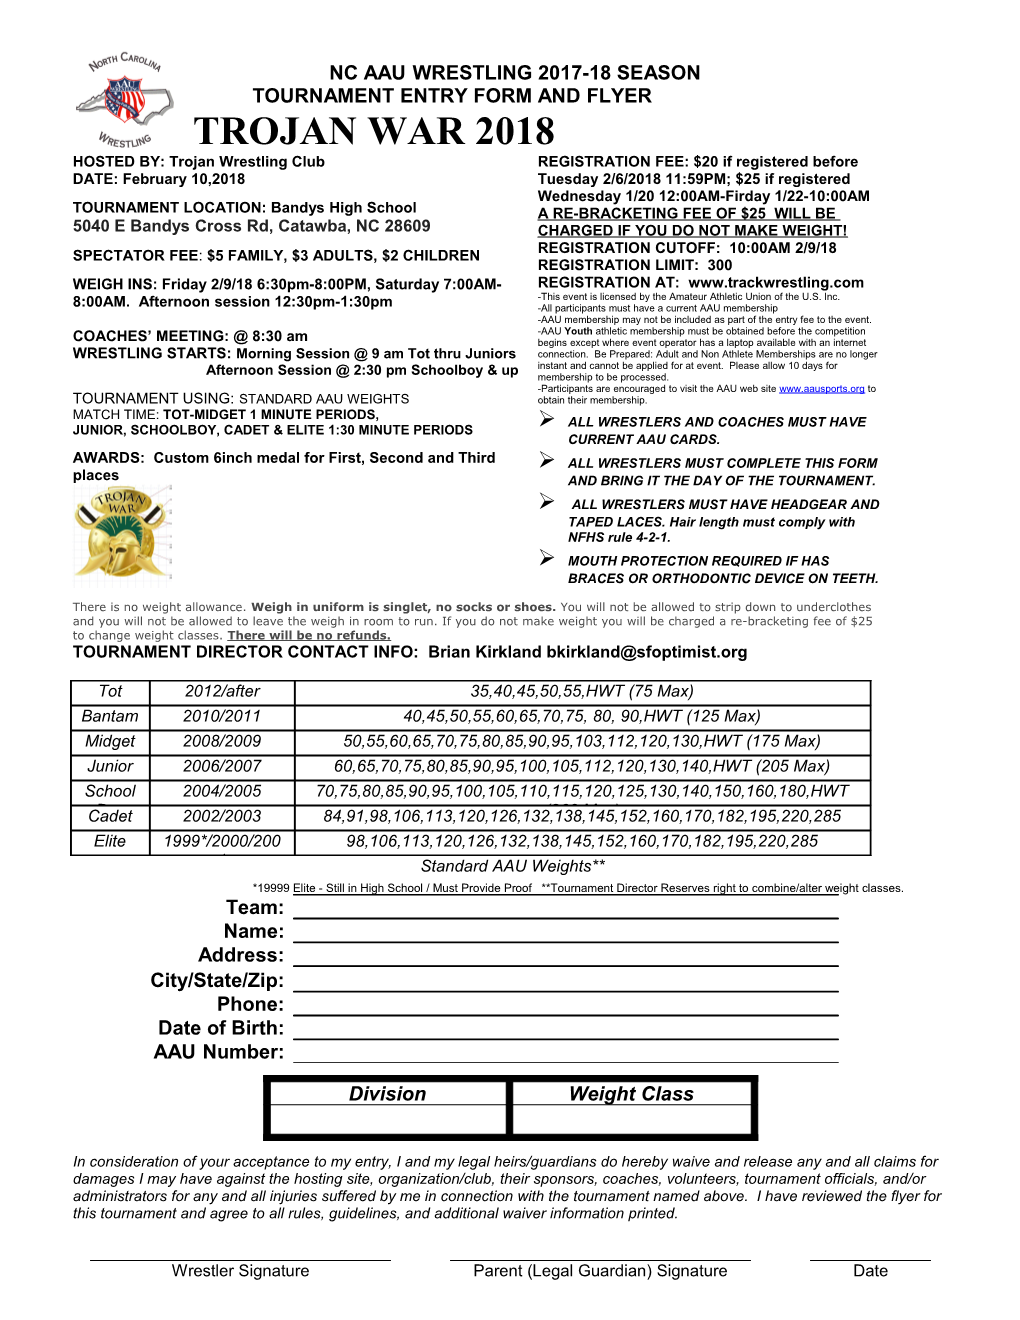 Tournament Entry Form and Flyer